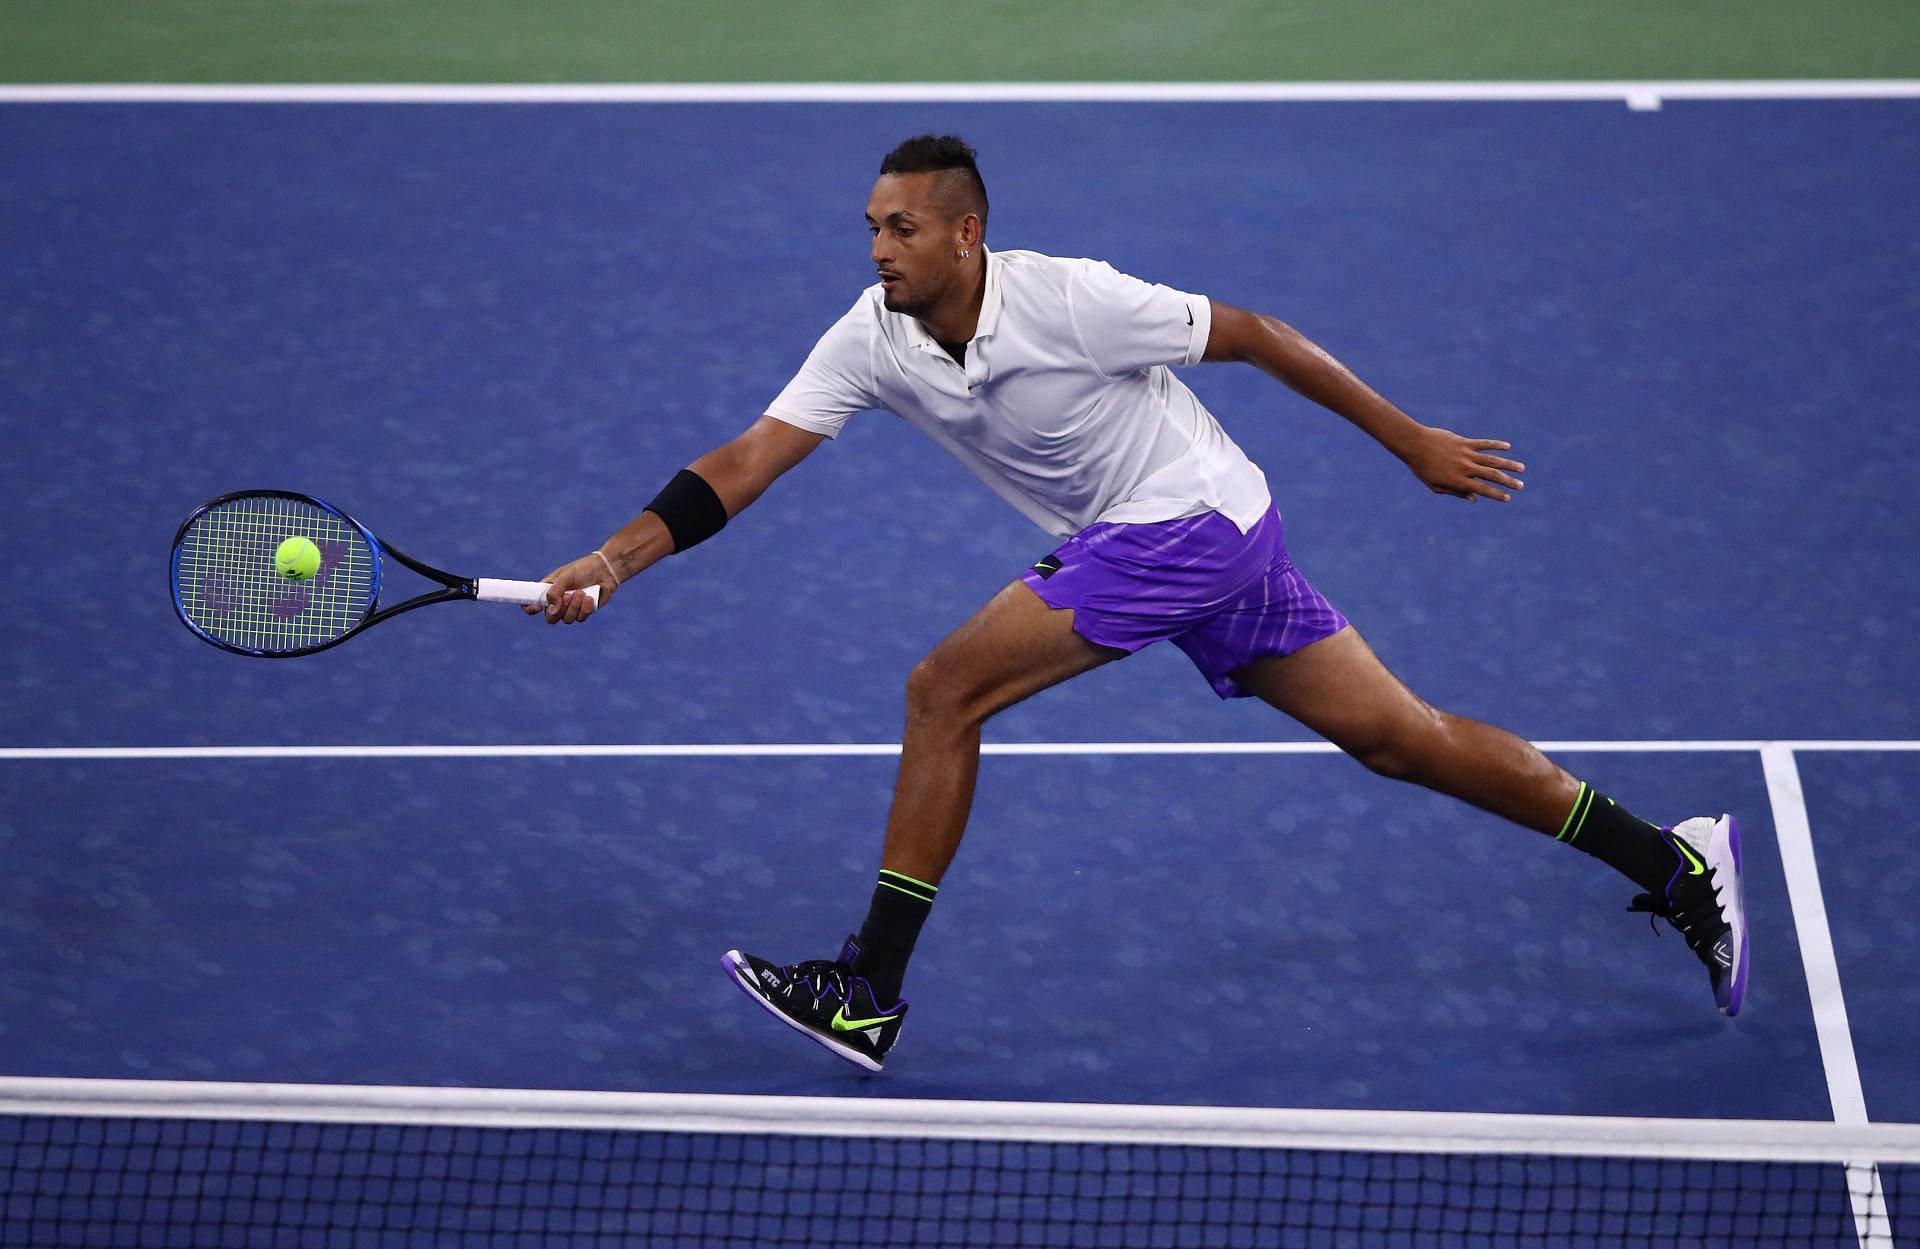 Nick Kyrgios in action at the 2019 US Open